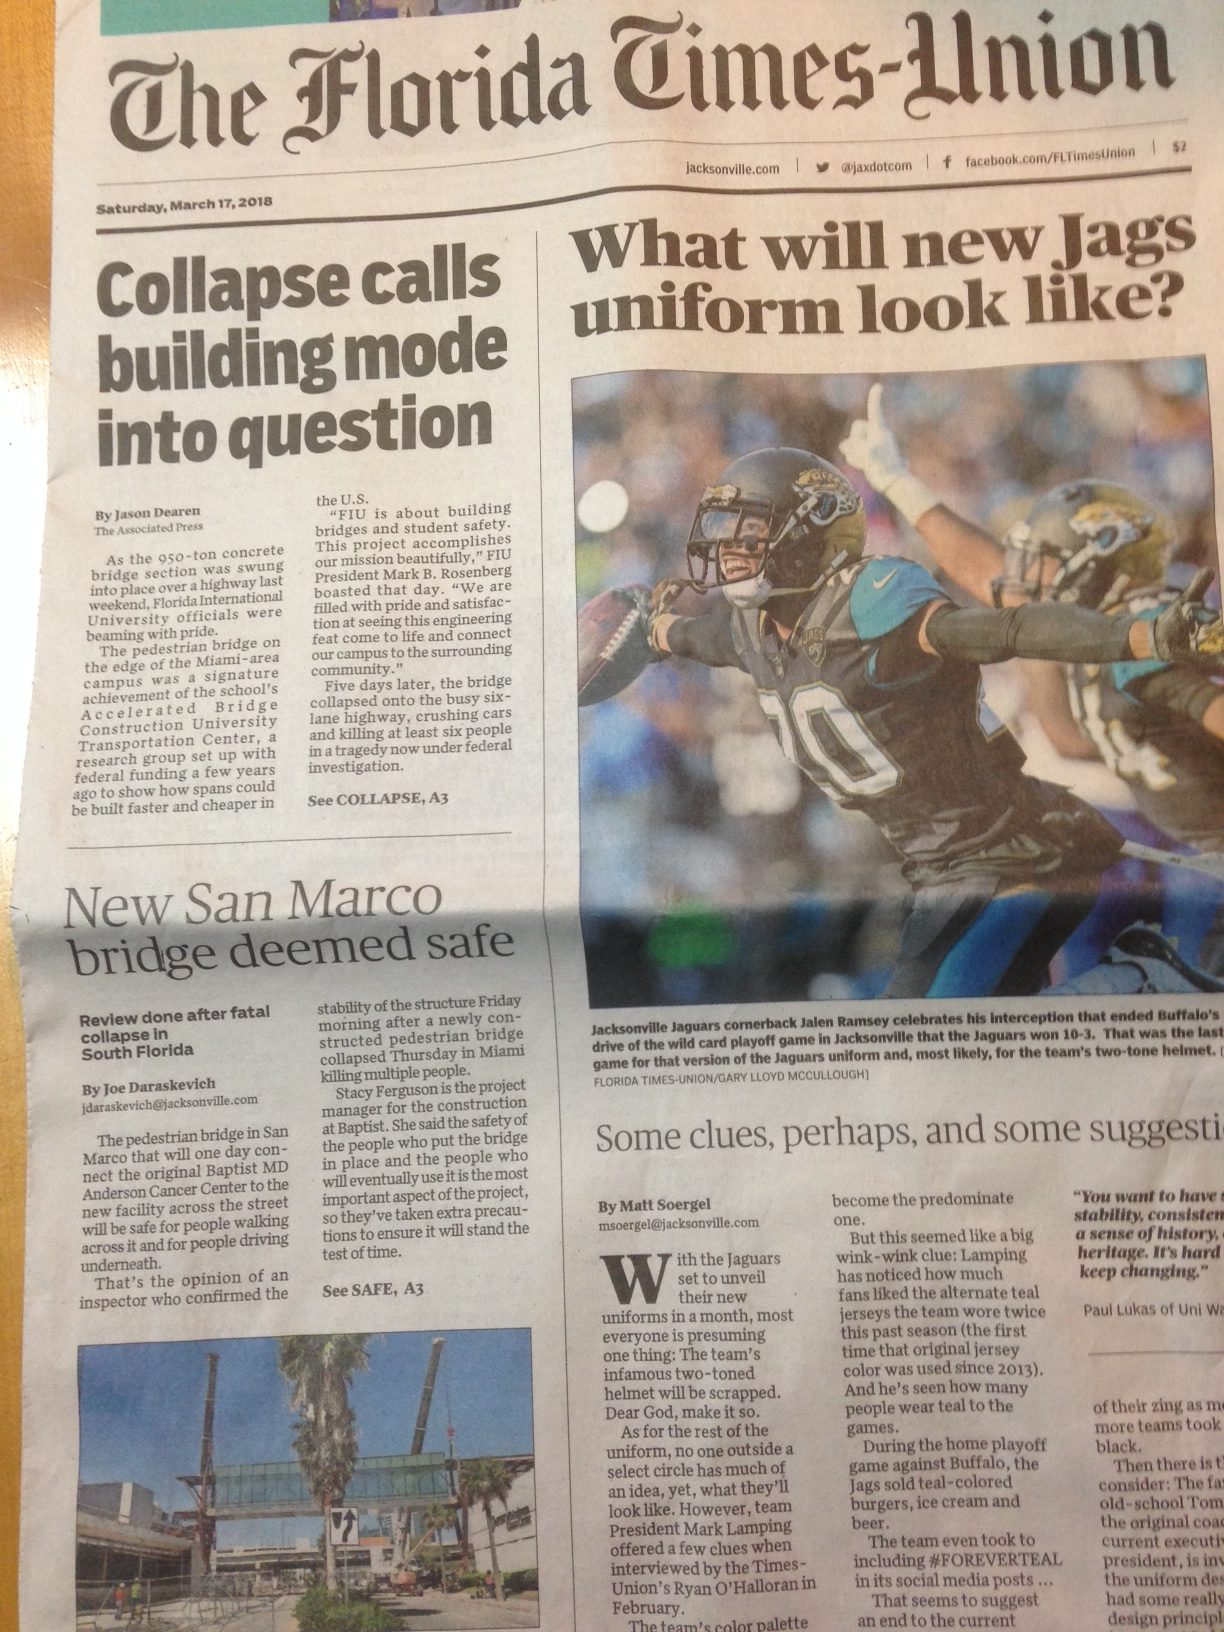 The Times-Union Lays Another Editorial Egg Inspiring The Jaguars PR Staff To Celebrate